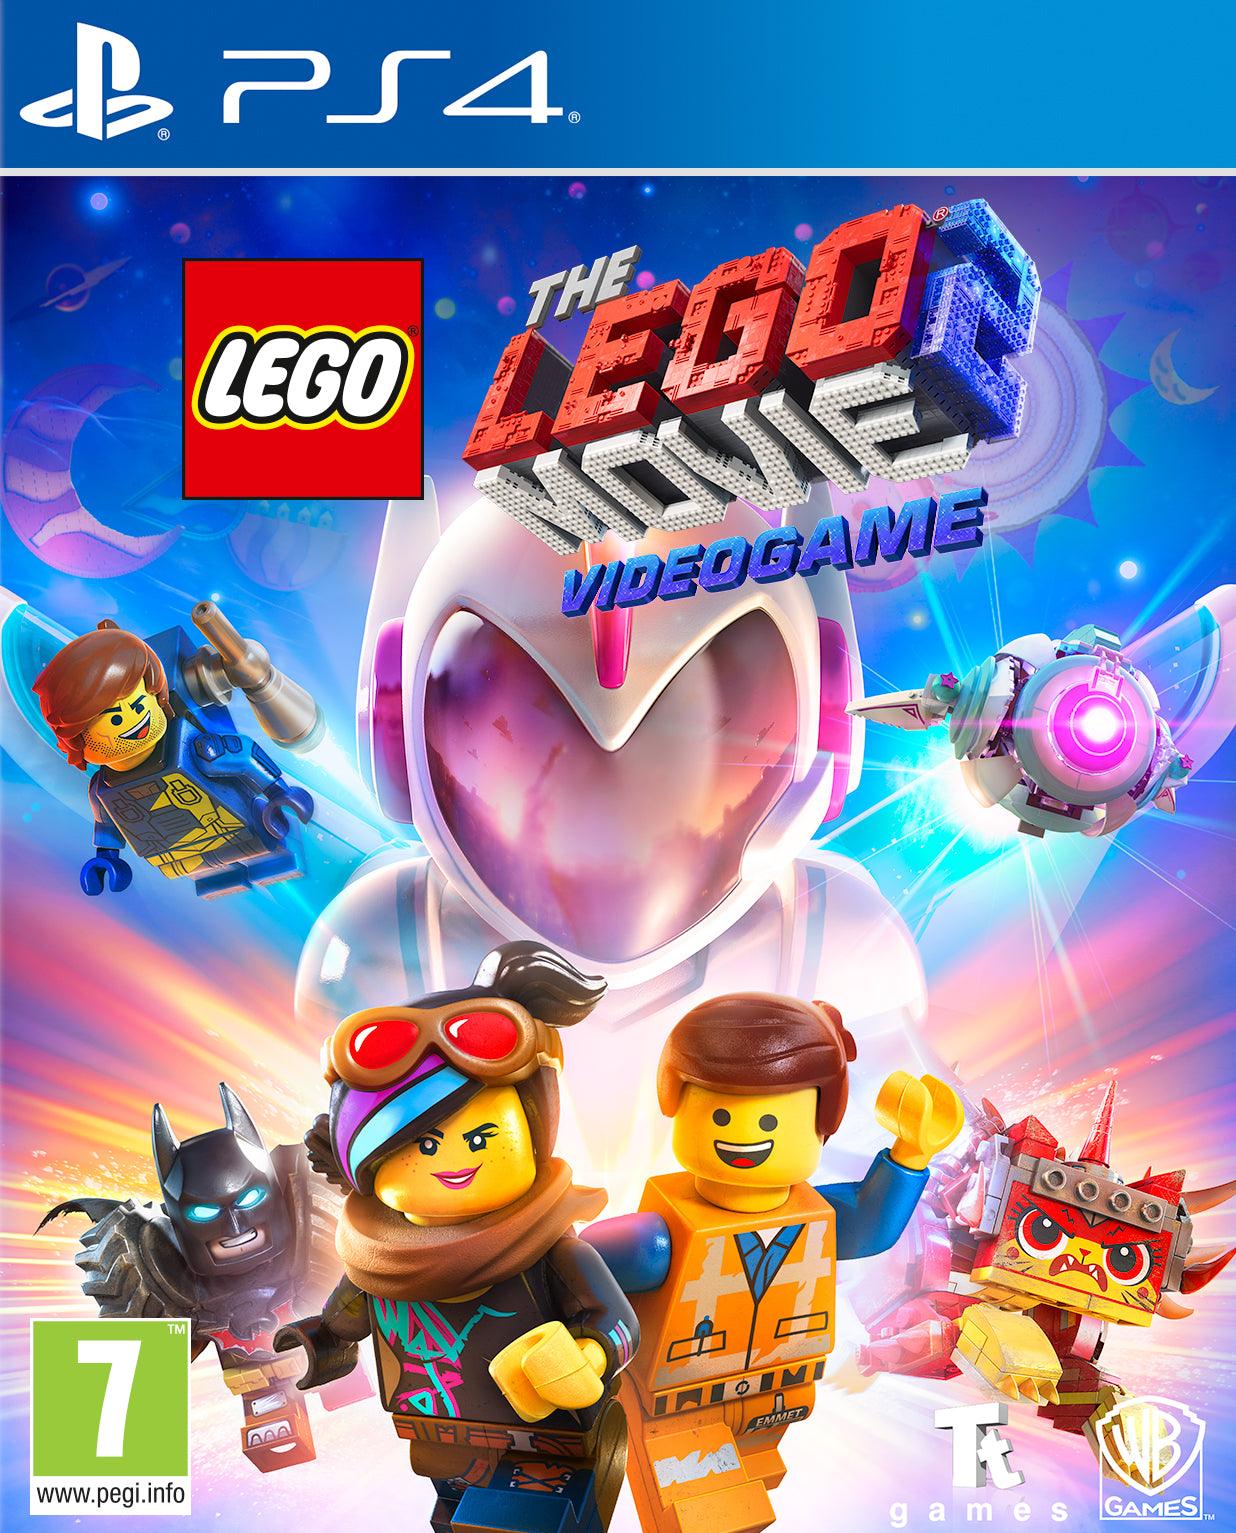 Lego Movie 2 Videogame - Want a New Gadget